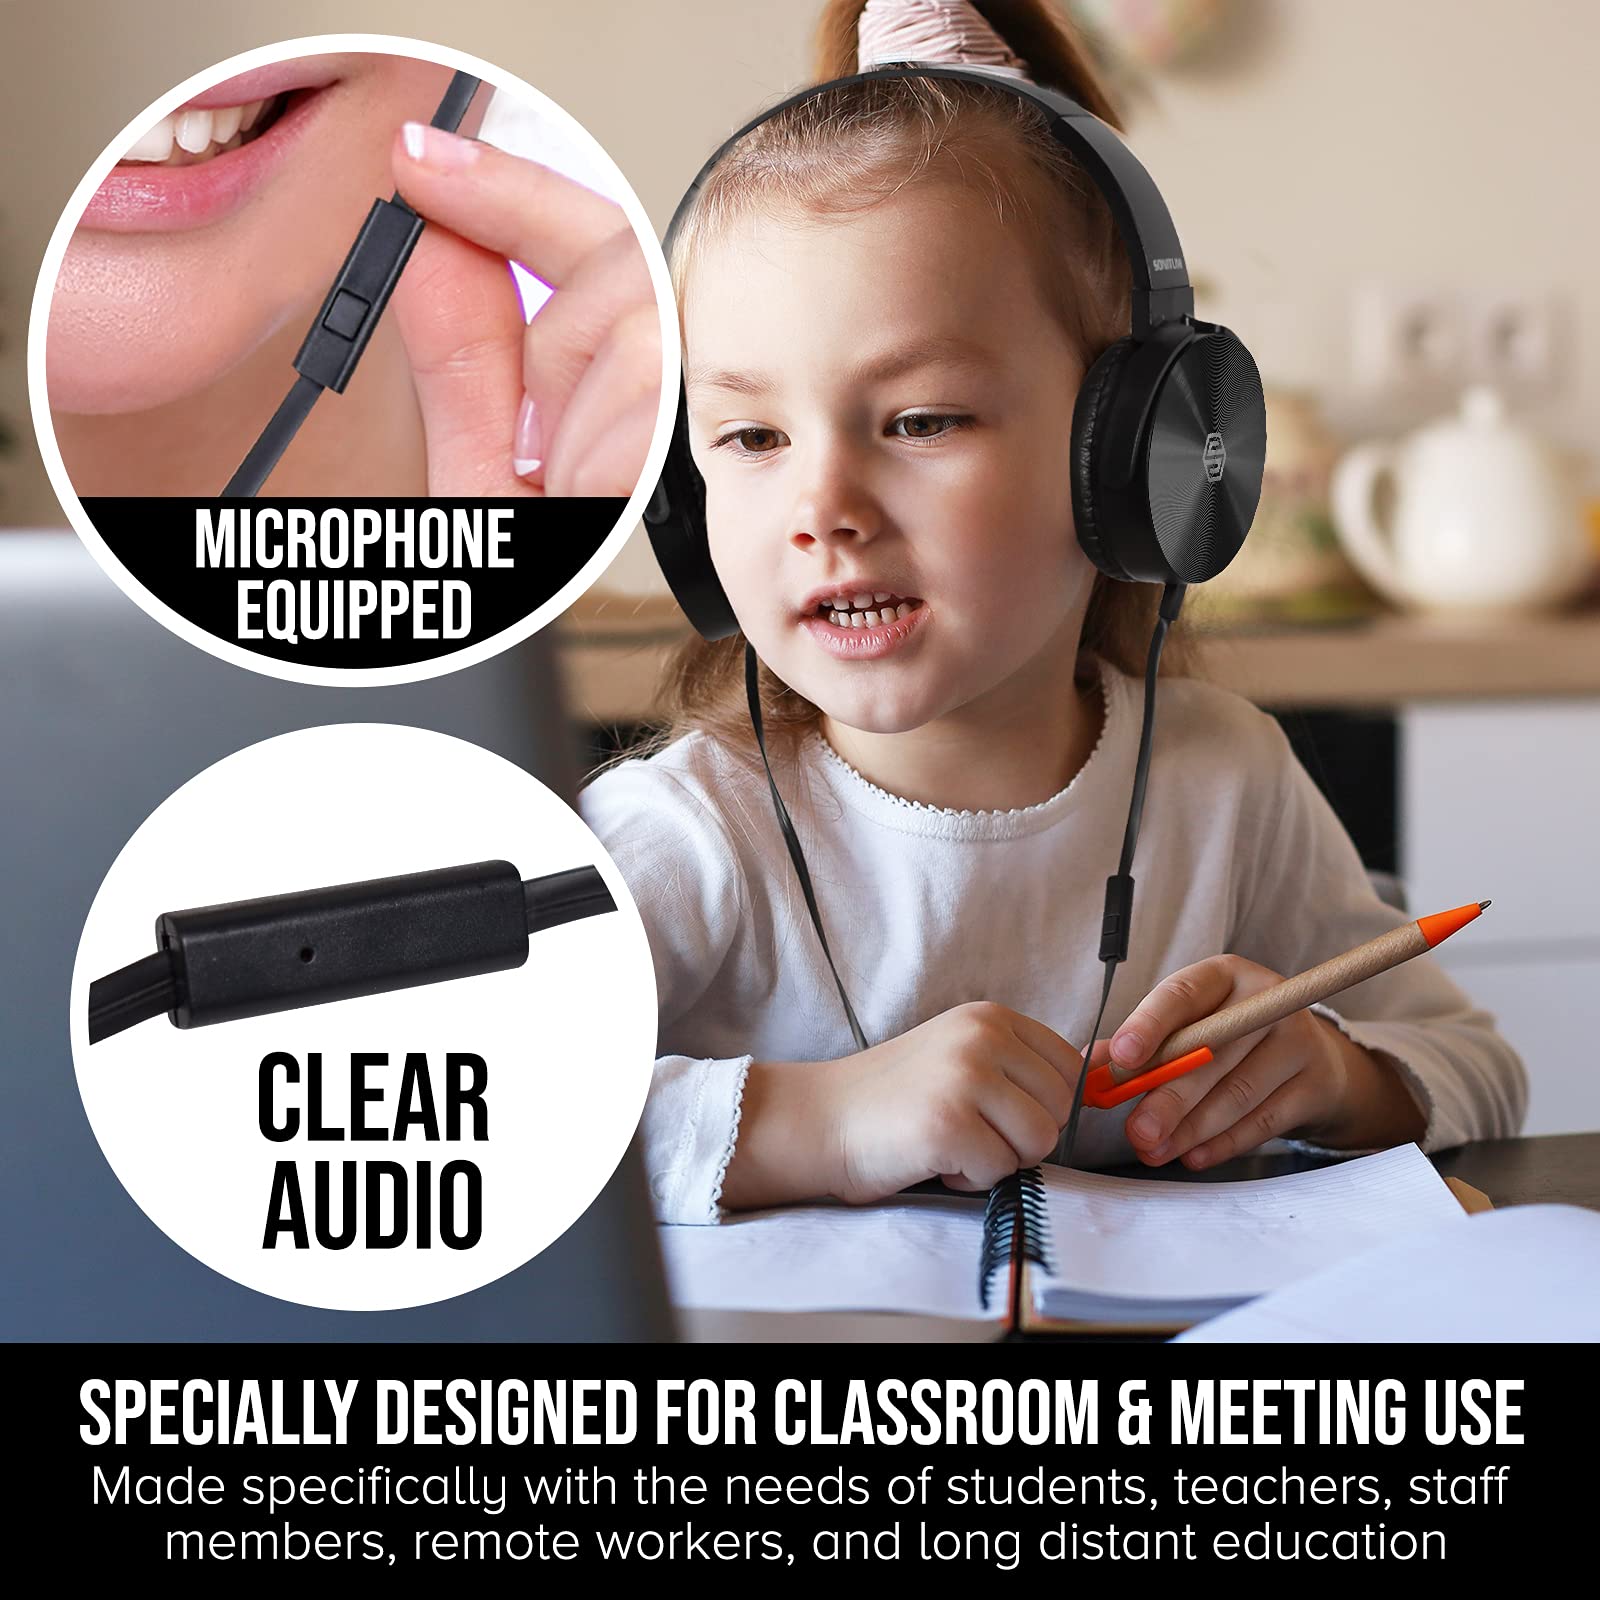 Classroom Headphones with Microphone Bulk 10-Pack, Student On Ear Comfy Swivel Earphones for Library, School, Airplane, Online Learning and Travel, HQ Stereo Sound 3.5mm Jack  - Like New